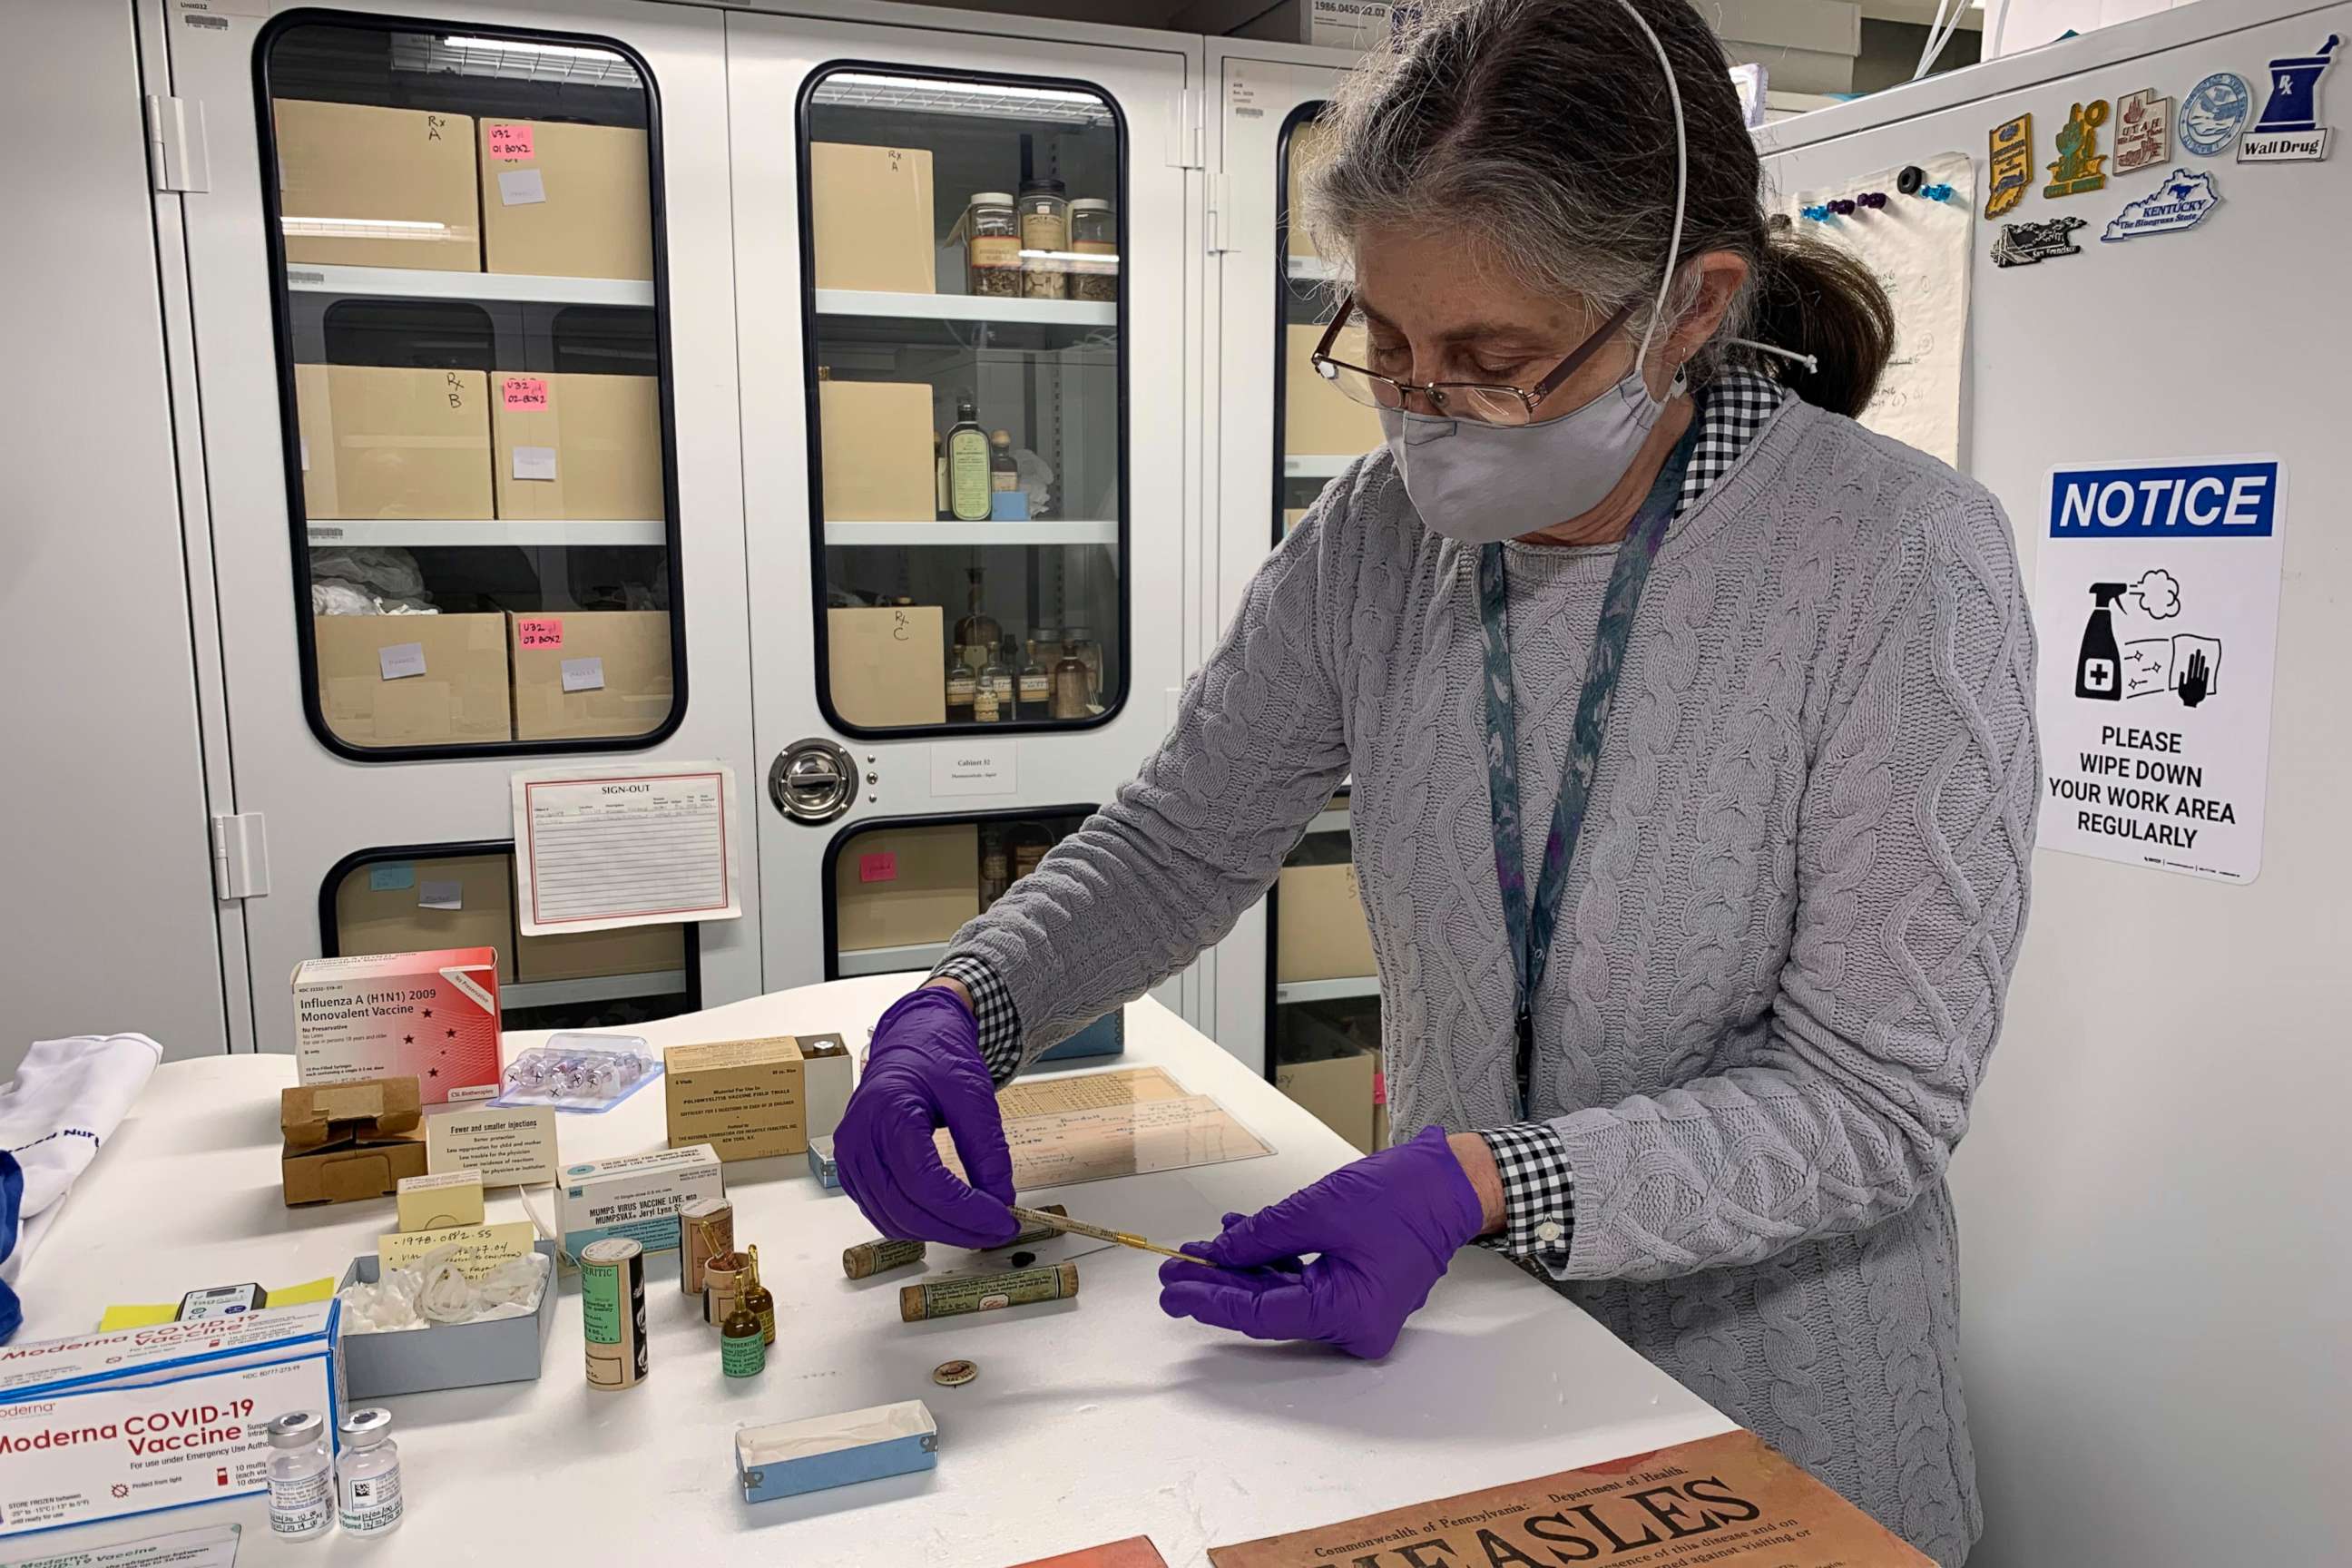 PHOTO: Diane Wendt, a curator at the Smithsonian Institution's National Museum of American History, displays a small glass tube containing one of the original batches of polio vaccine in Washington, D.C., on March 8, 2021.